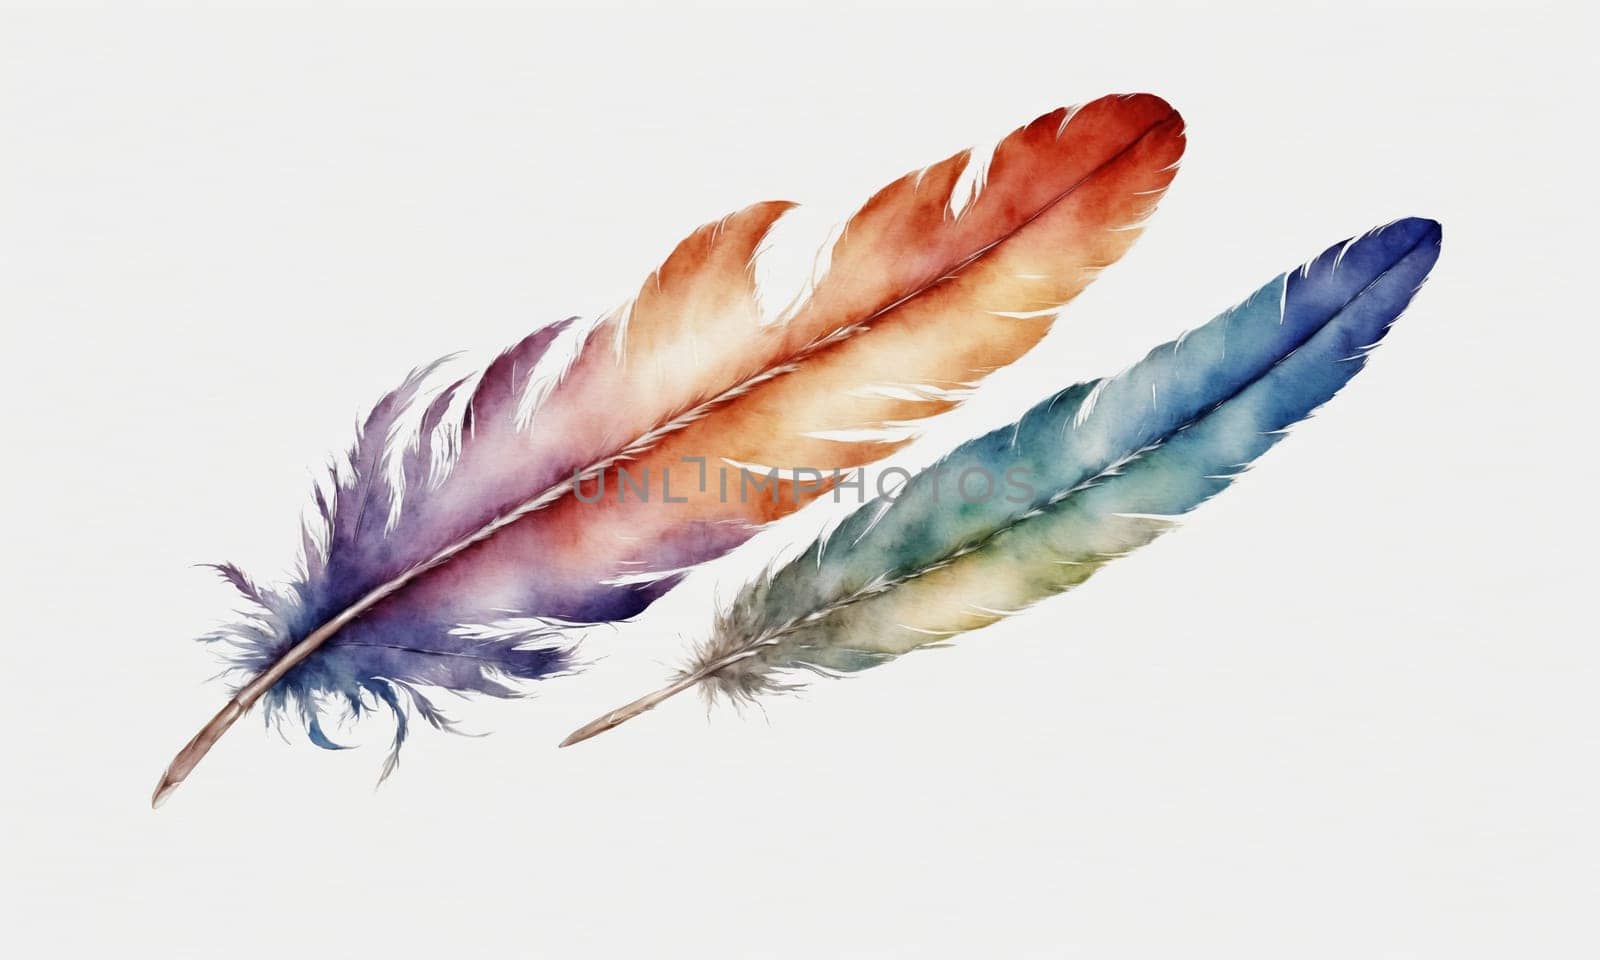 Watercolor feathers isolated on white background. Hand-drawn illustration. by Andre1ns